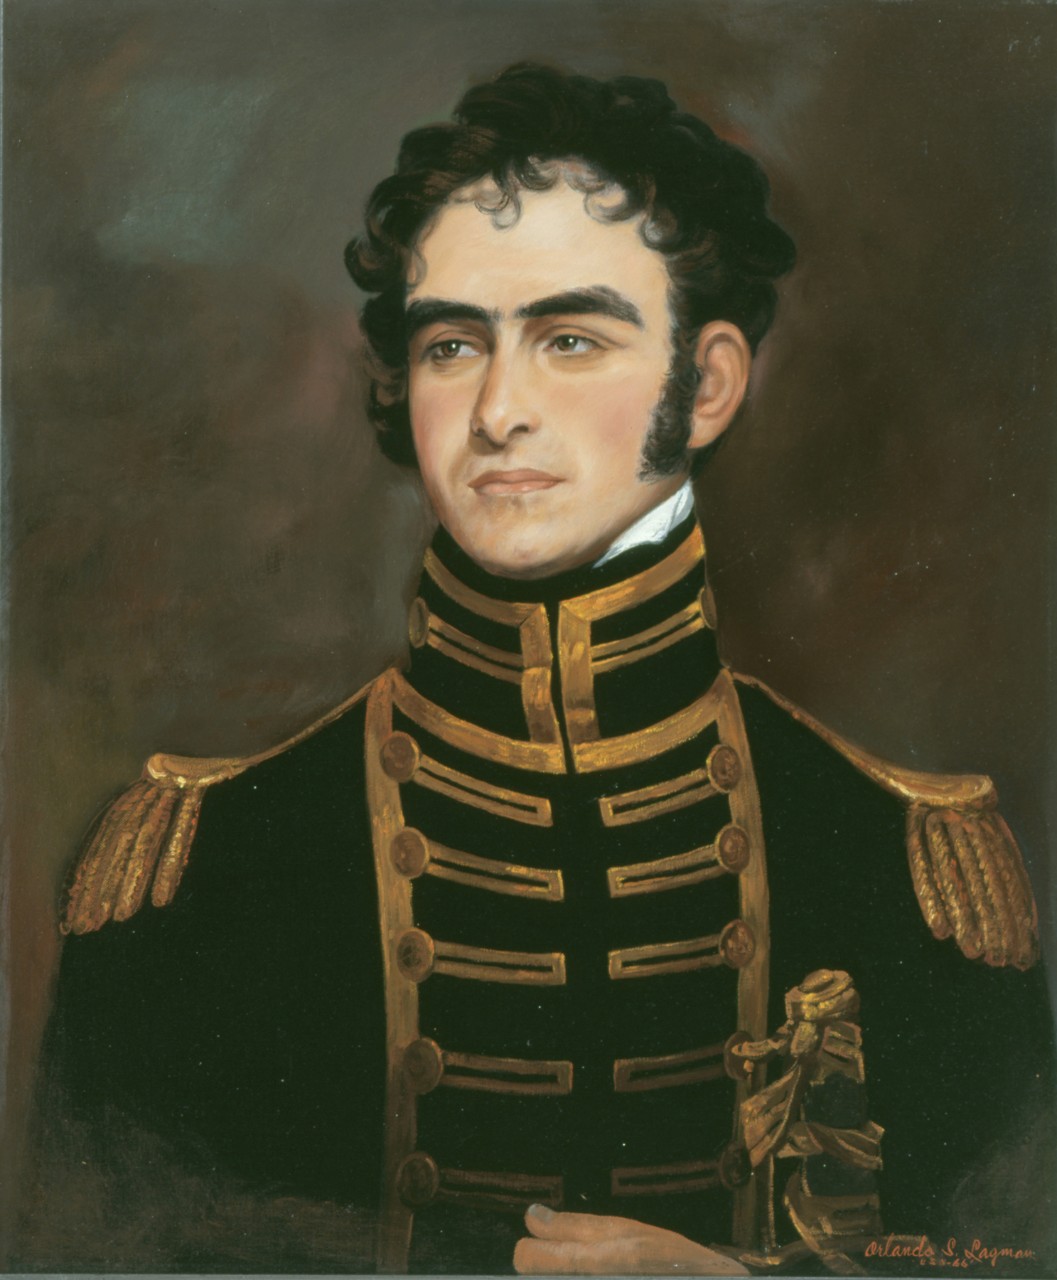 A portrait of Commodore John Rodgers, he is holding his sword in his left hand there is smoke in the background